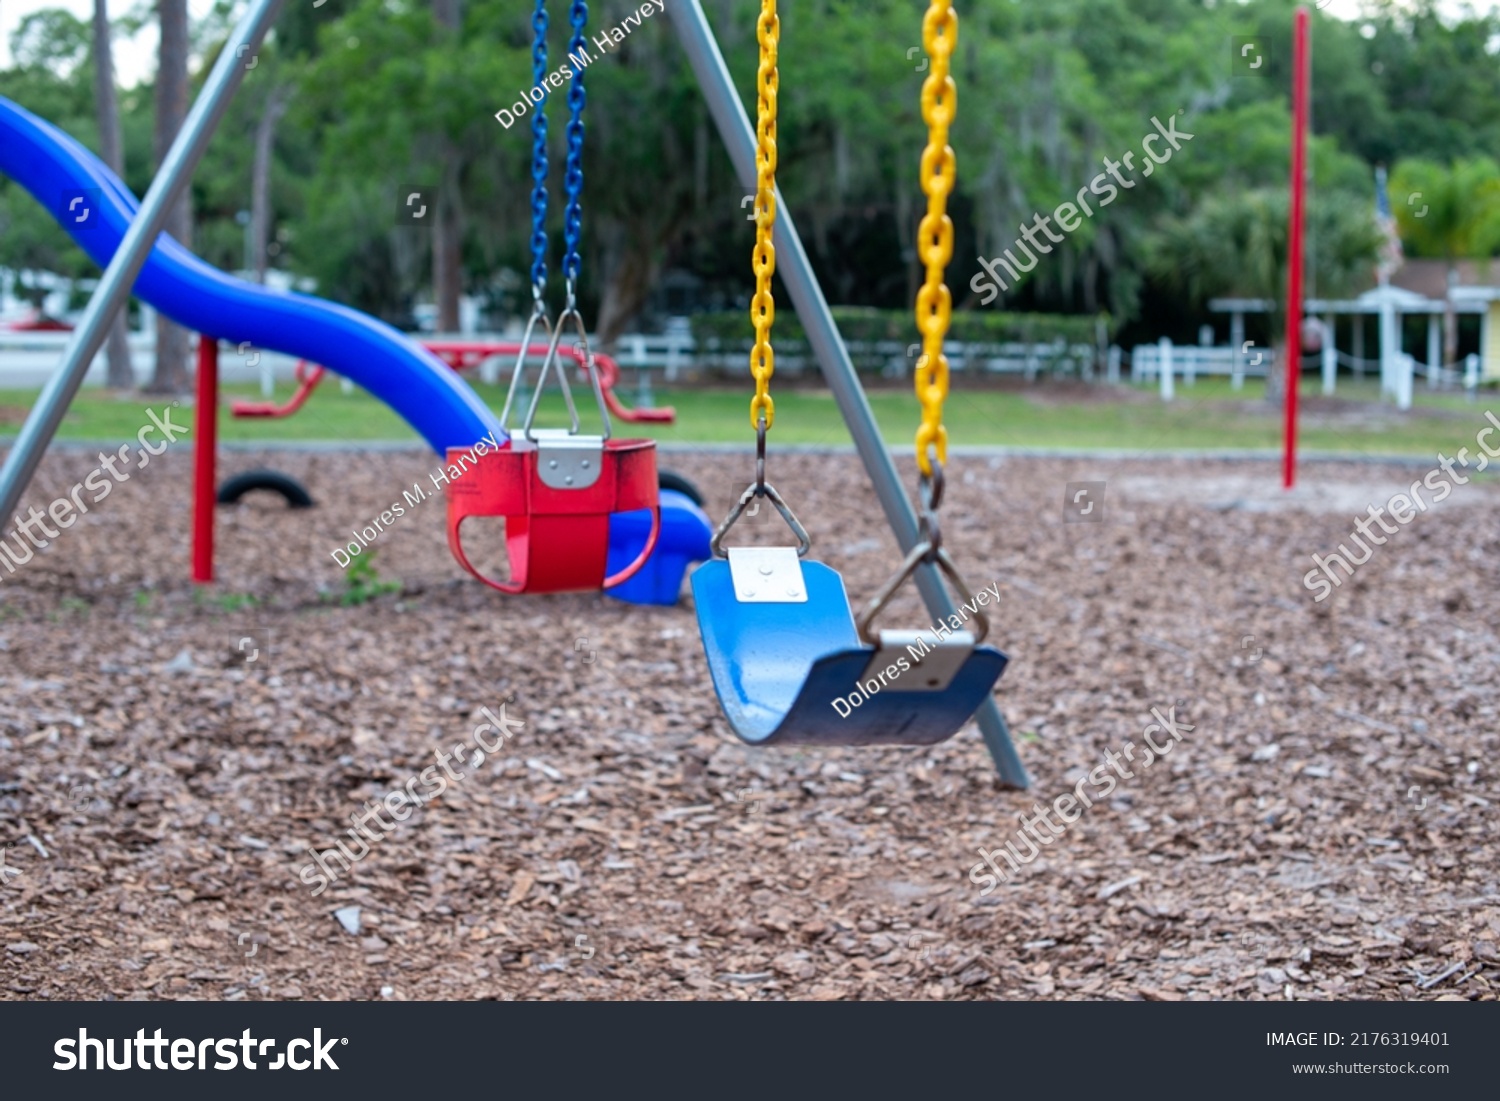 Multiple plastic and rubber swings hanging from chains in a children's park. There's a blue plastic slide in the background with large lush trees and benches. The ground is covered in tree mulch.  #2176319401